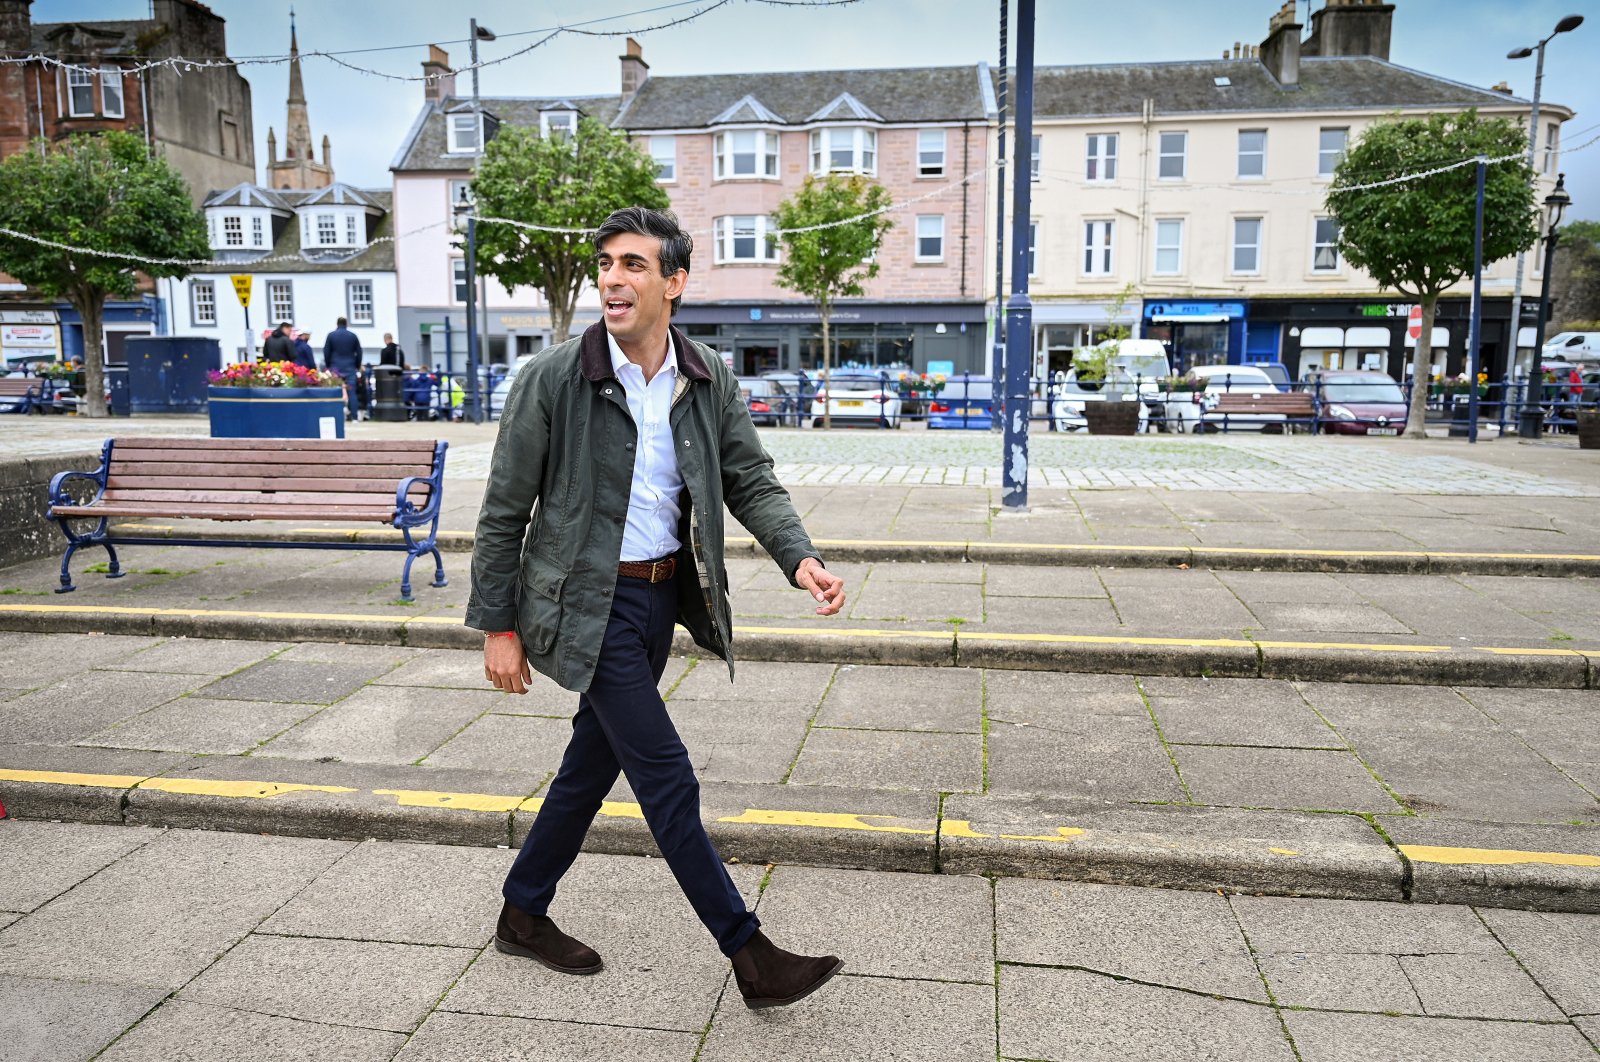 Britain's Chancellor of the Exchequer Rishi Sunak visits Rothesay, in the Isle of Bute, Scotland, Britain, Aug. 7, 2020. (Reuters Photo)